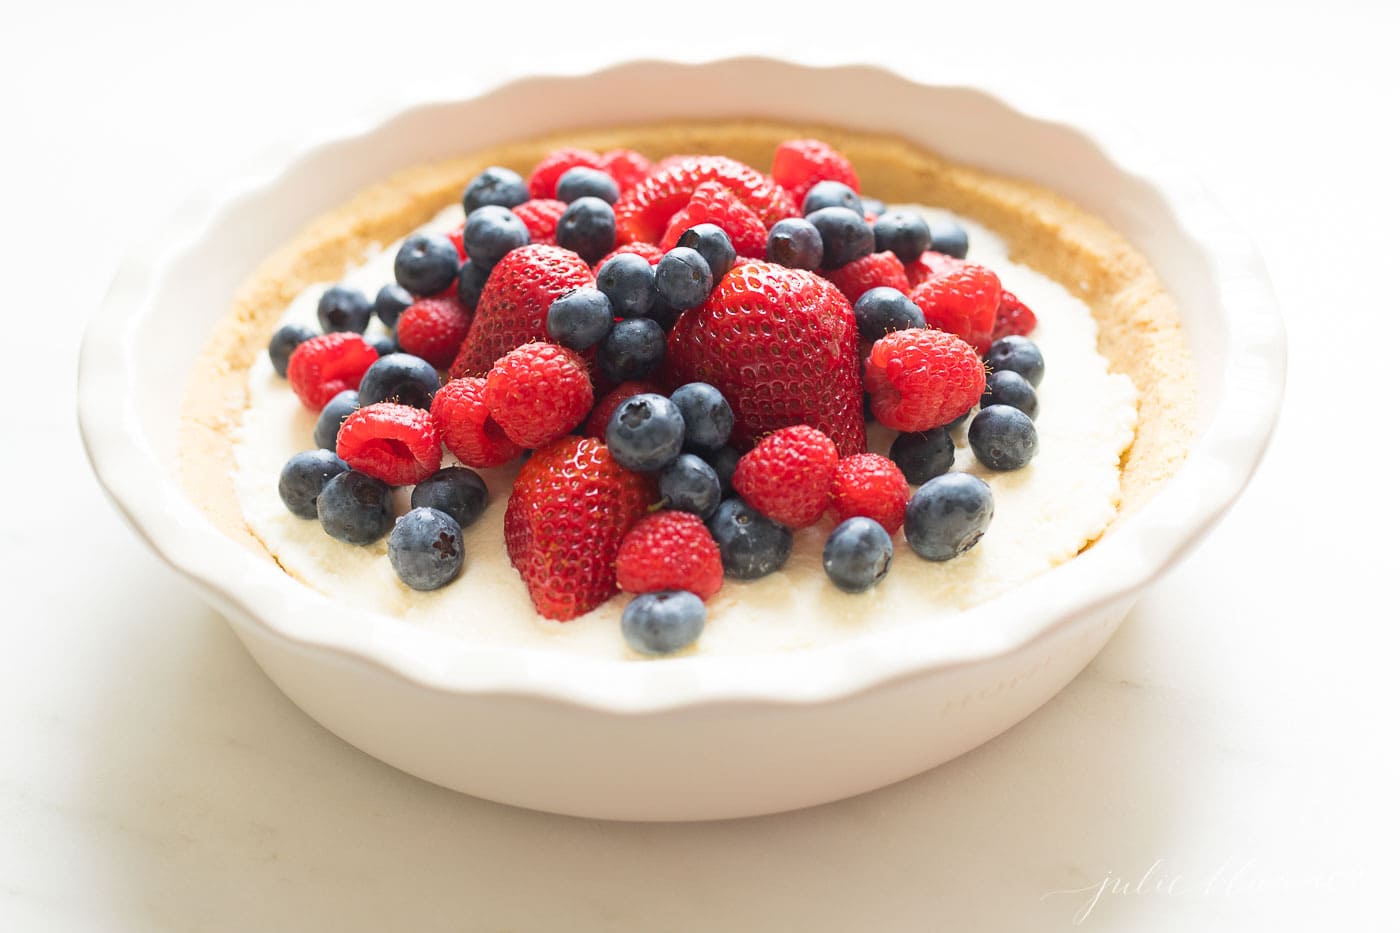 A no bake lemon pie in a white baking dish topped with fresh berries